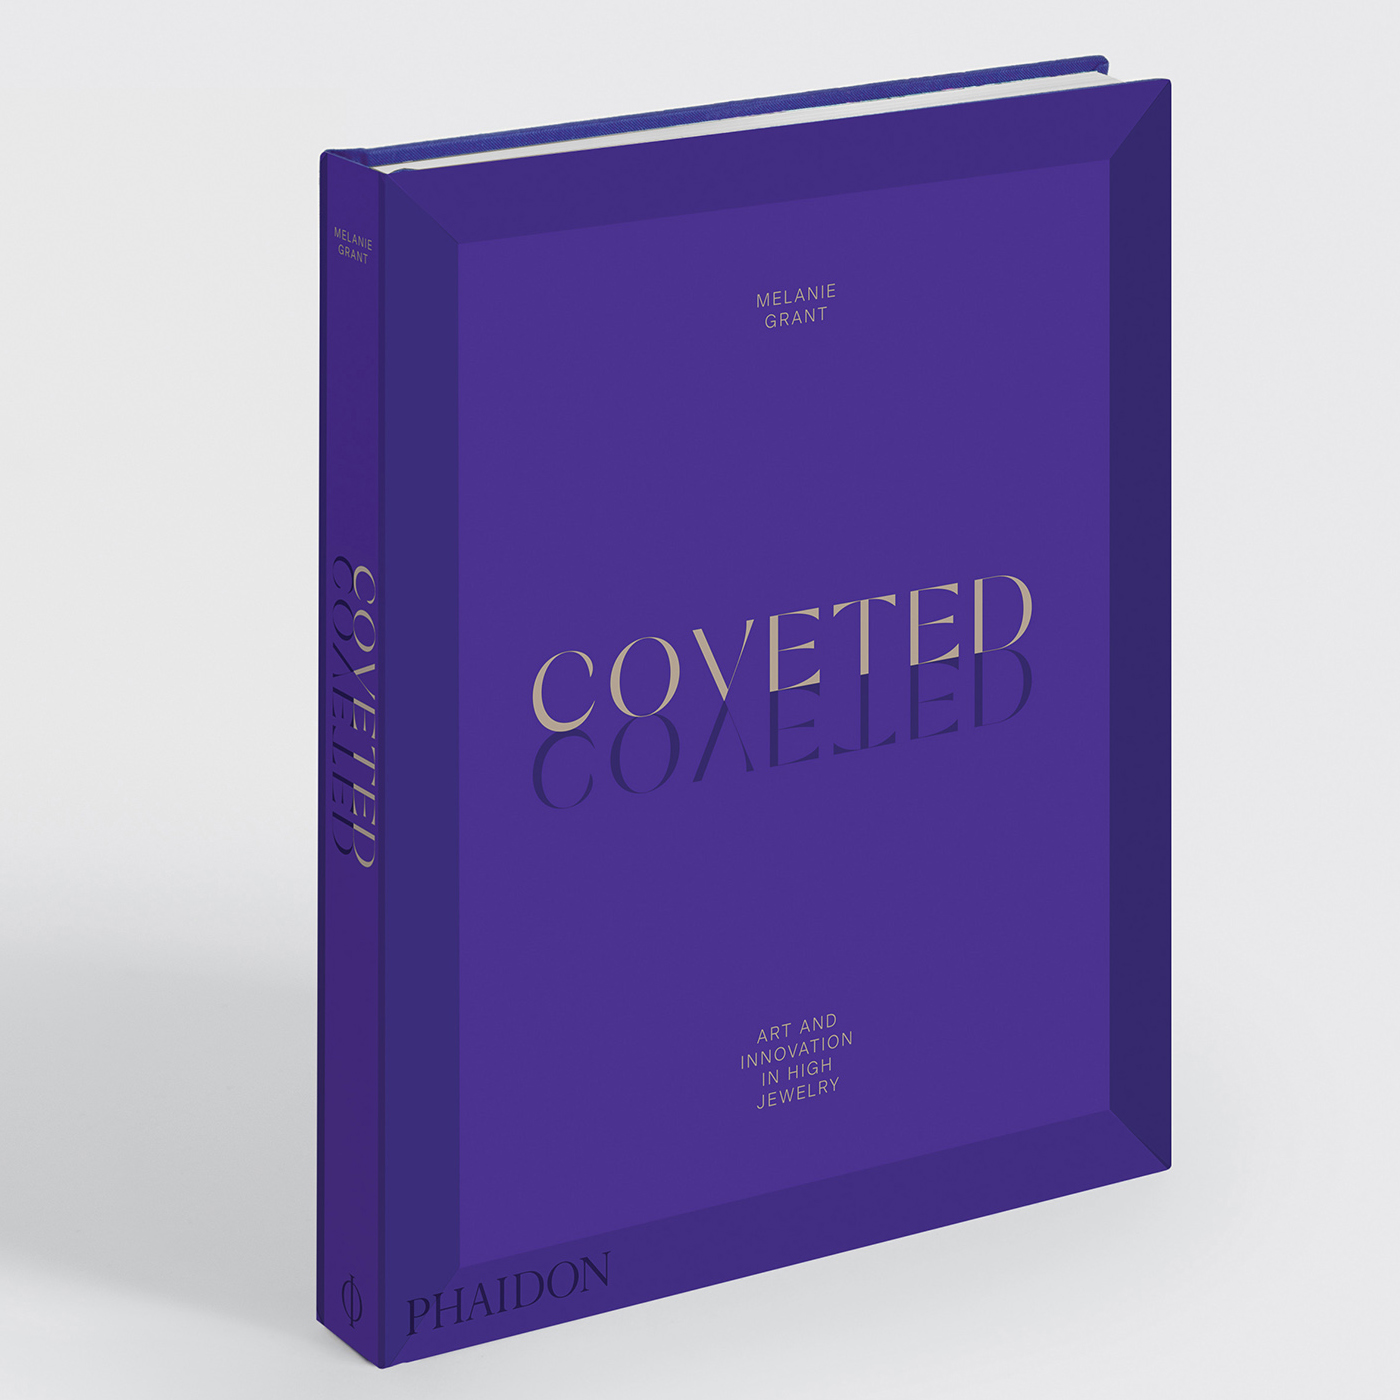 Coveted, the must-have jewellery book by Melanie Grant